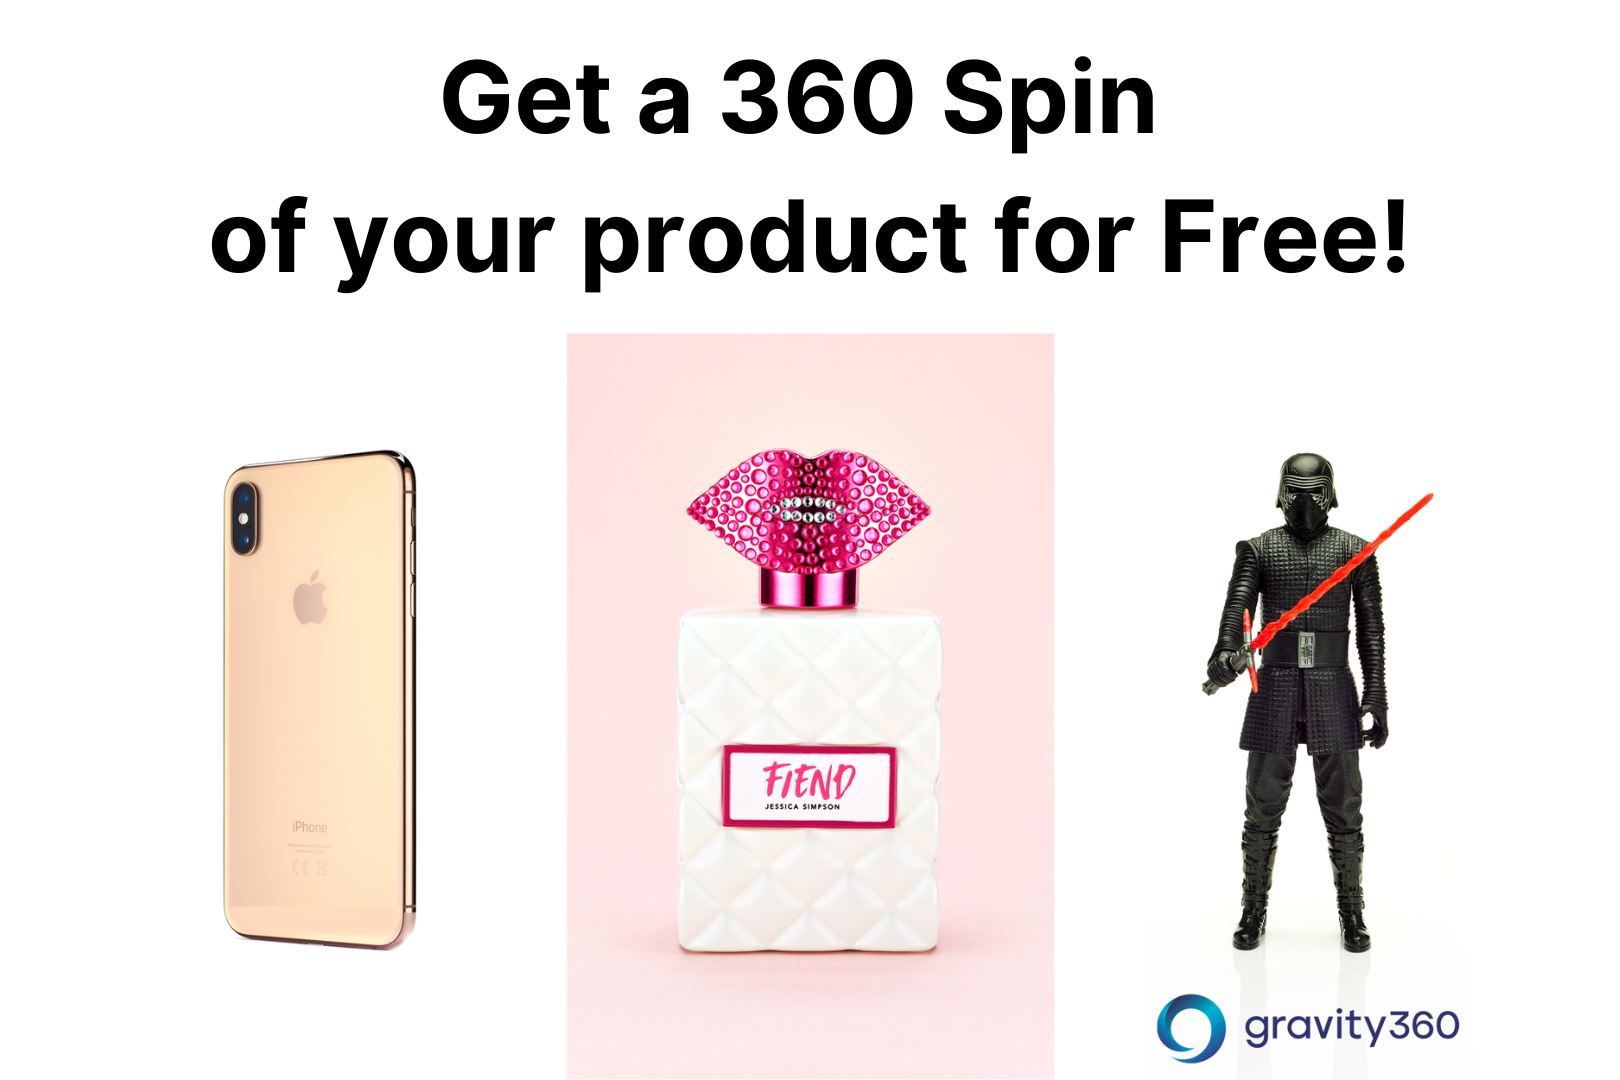 Show Exclusive. A complimentary 360 Spin of your product.